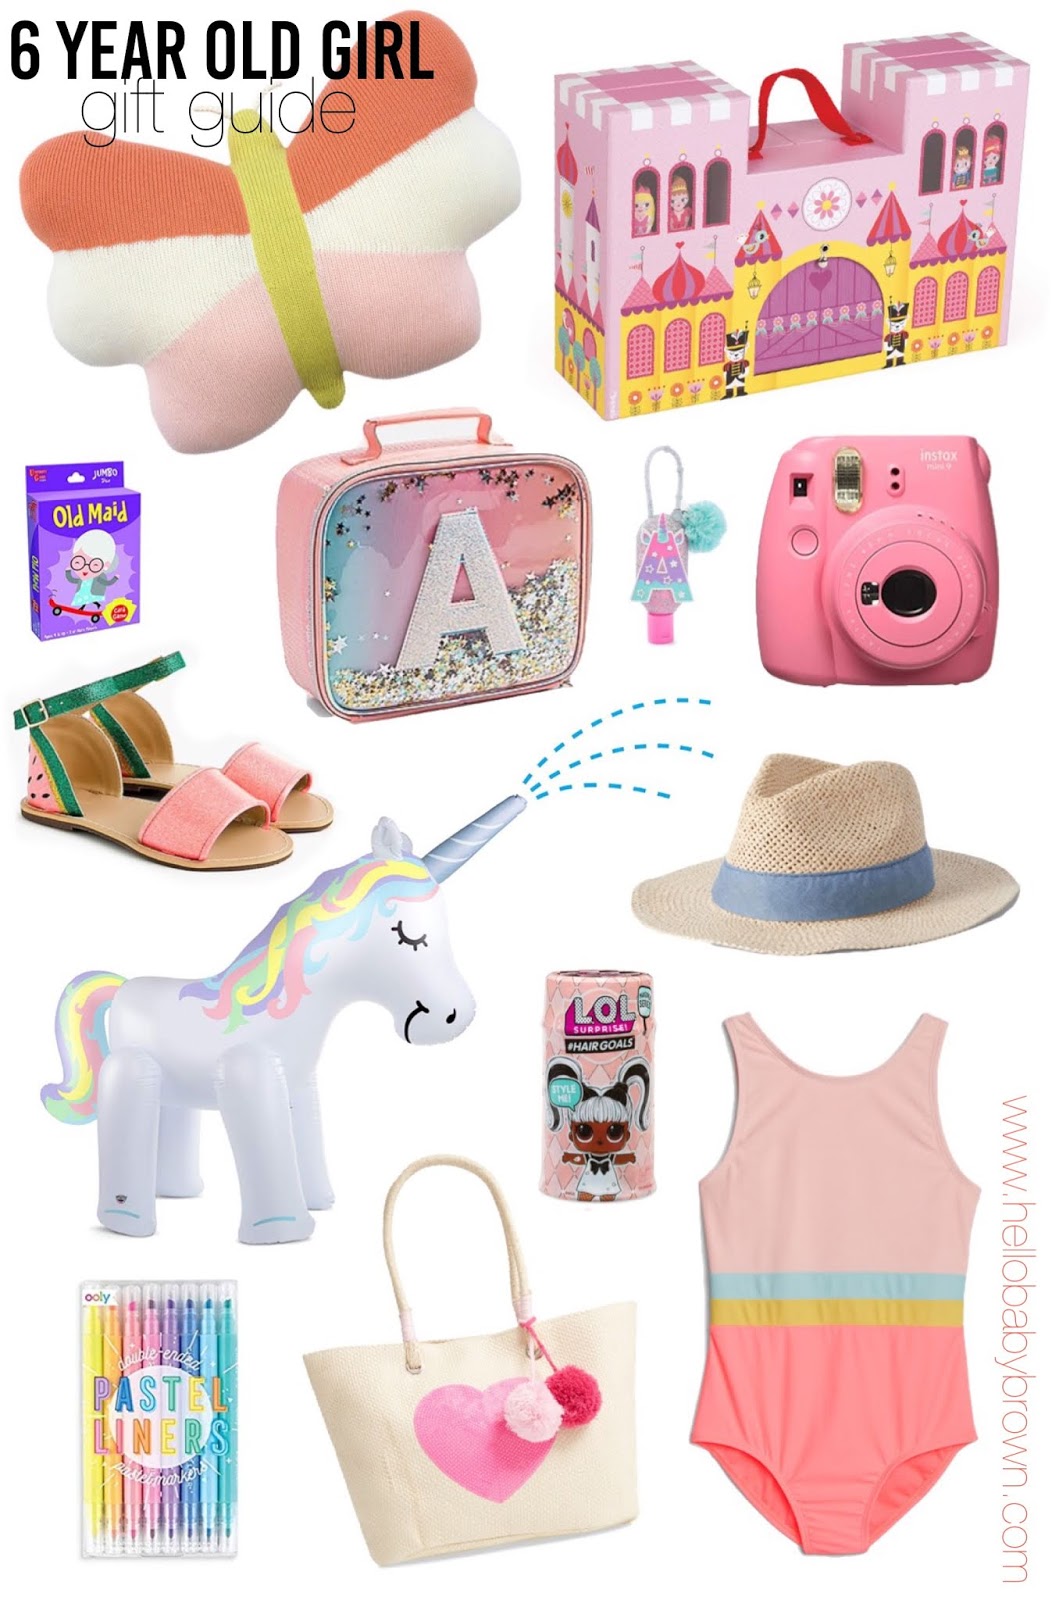 Hello Baby Brown: Six Year Old Girls Gift Guide